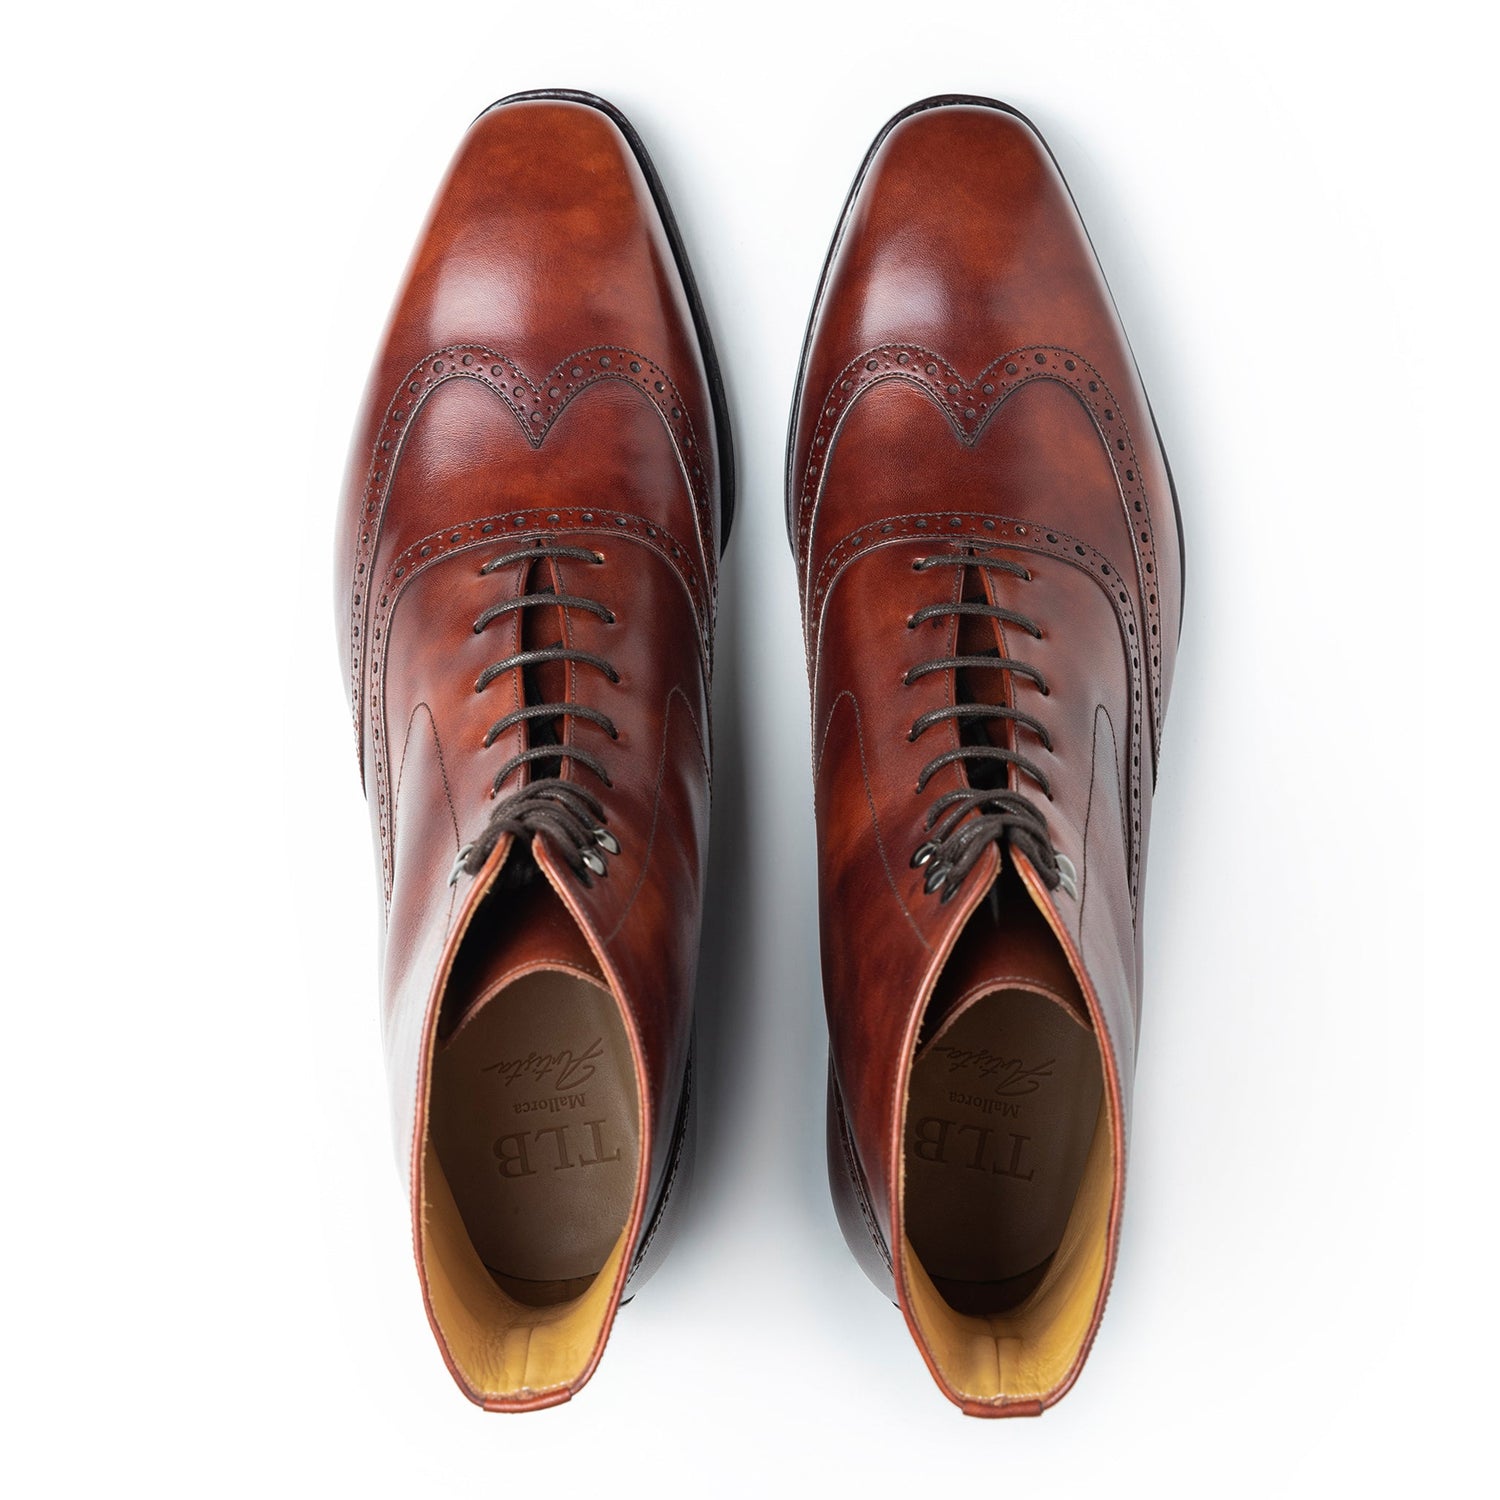 TLB Mallorca leather shoes - Men's Boots 